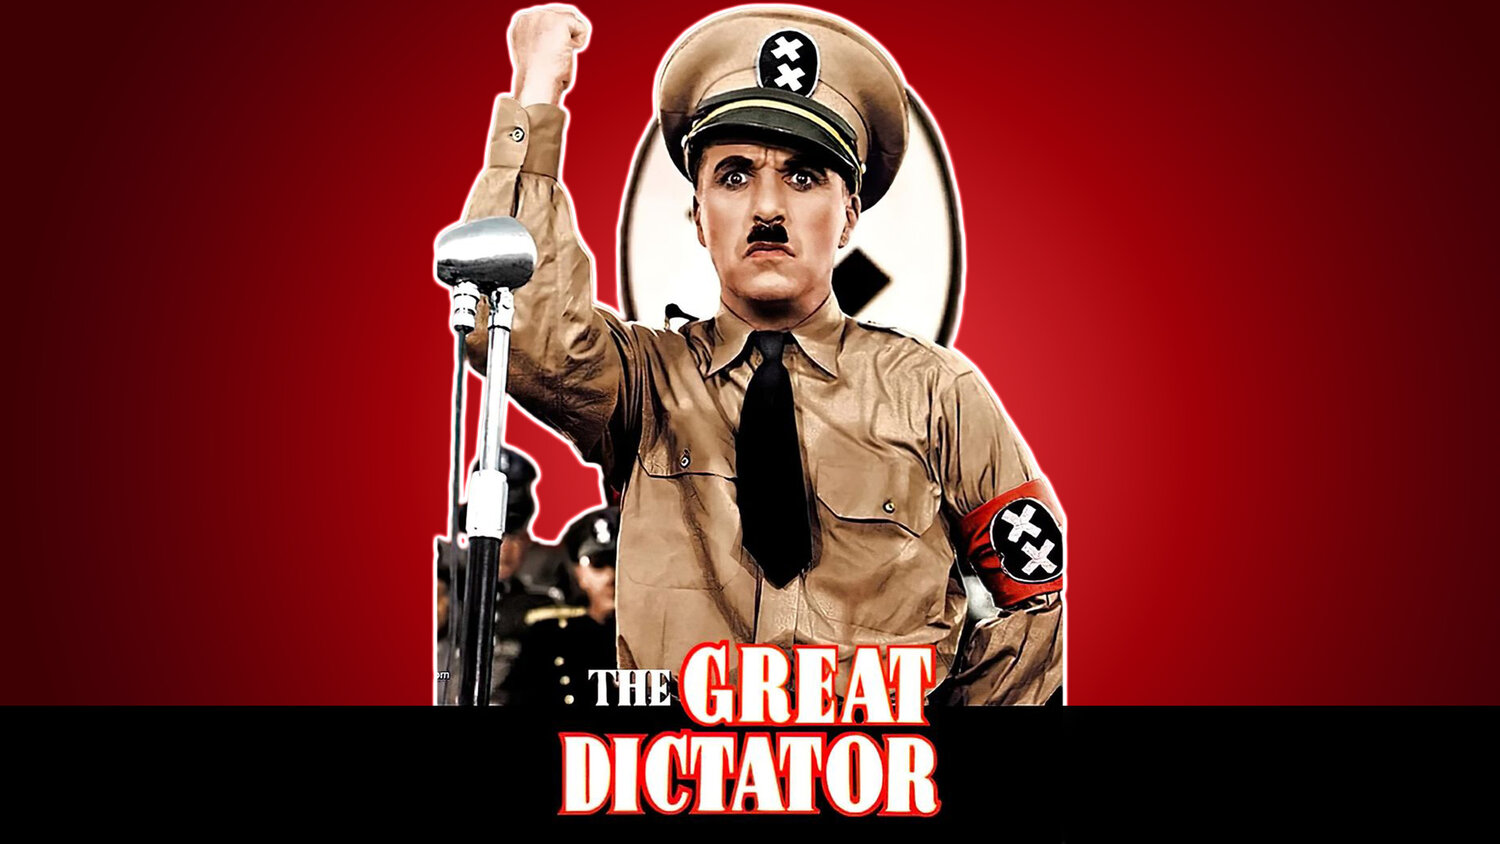 43-facts-about-the-movie-the-great-dictator